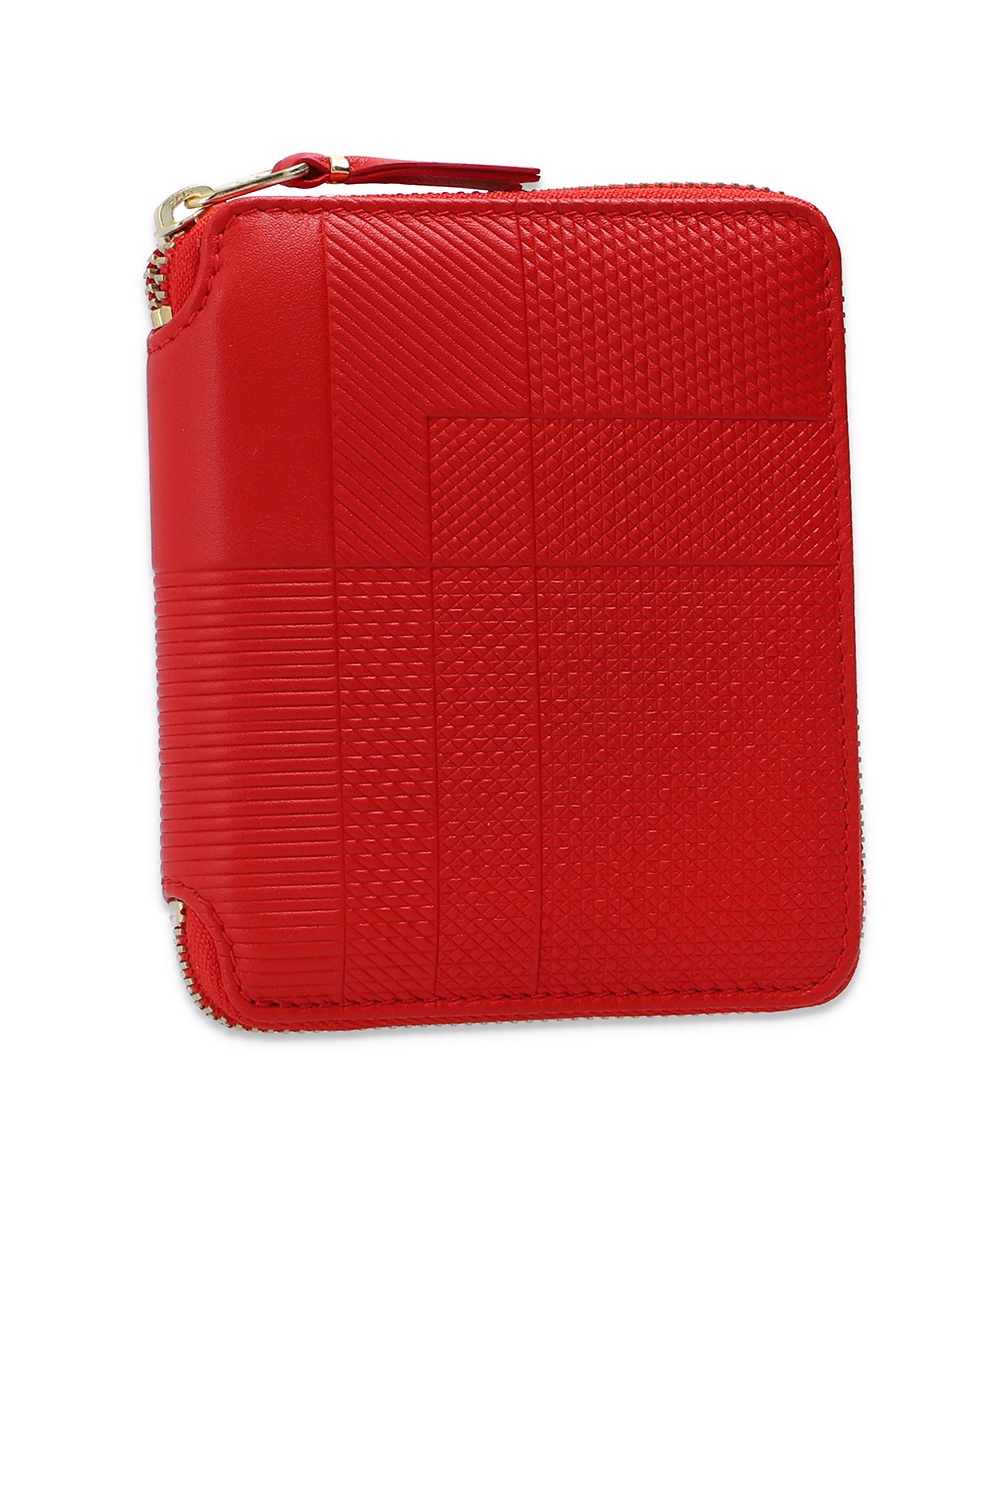 Red Leather wallet Comme des Garçons - Vitkac Italy